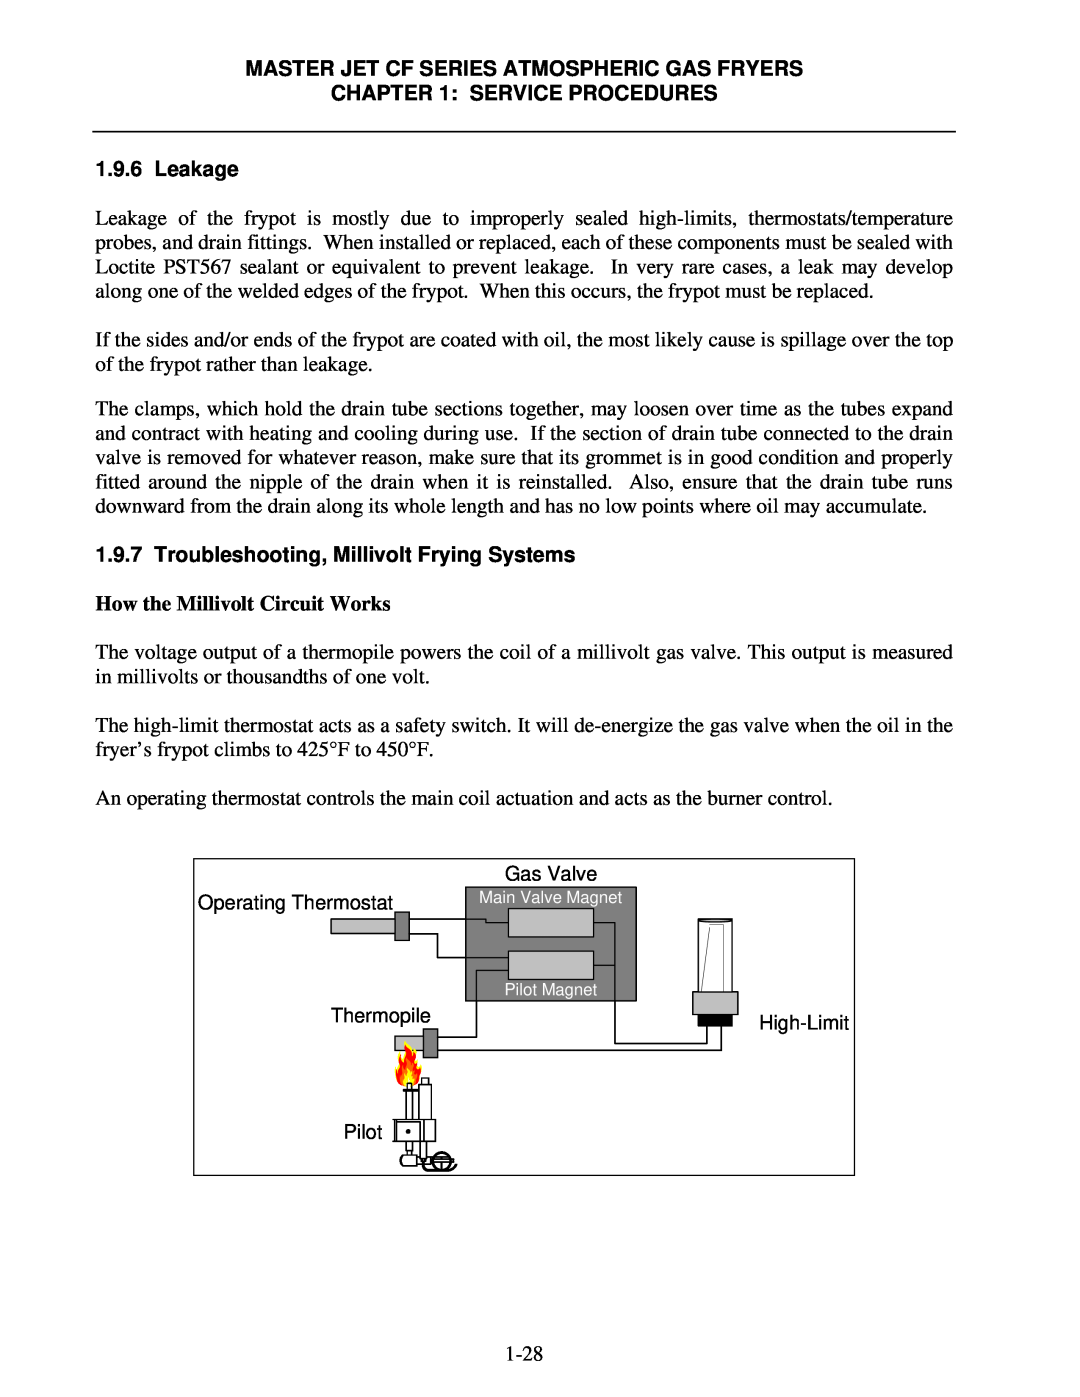 Frymaster J3F SERVICE PROCEDURES 1.9.6 Leakage, Troubleshooting, Millivolt Frying Systems, How the Millivolt Circuit Works 